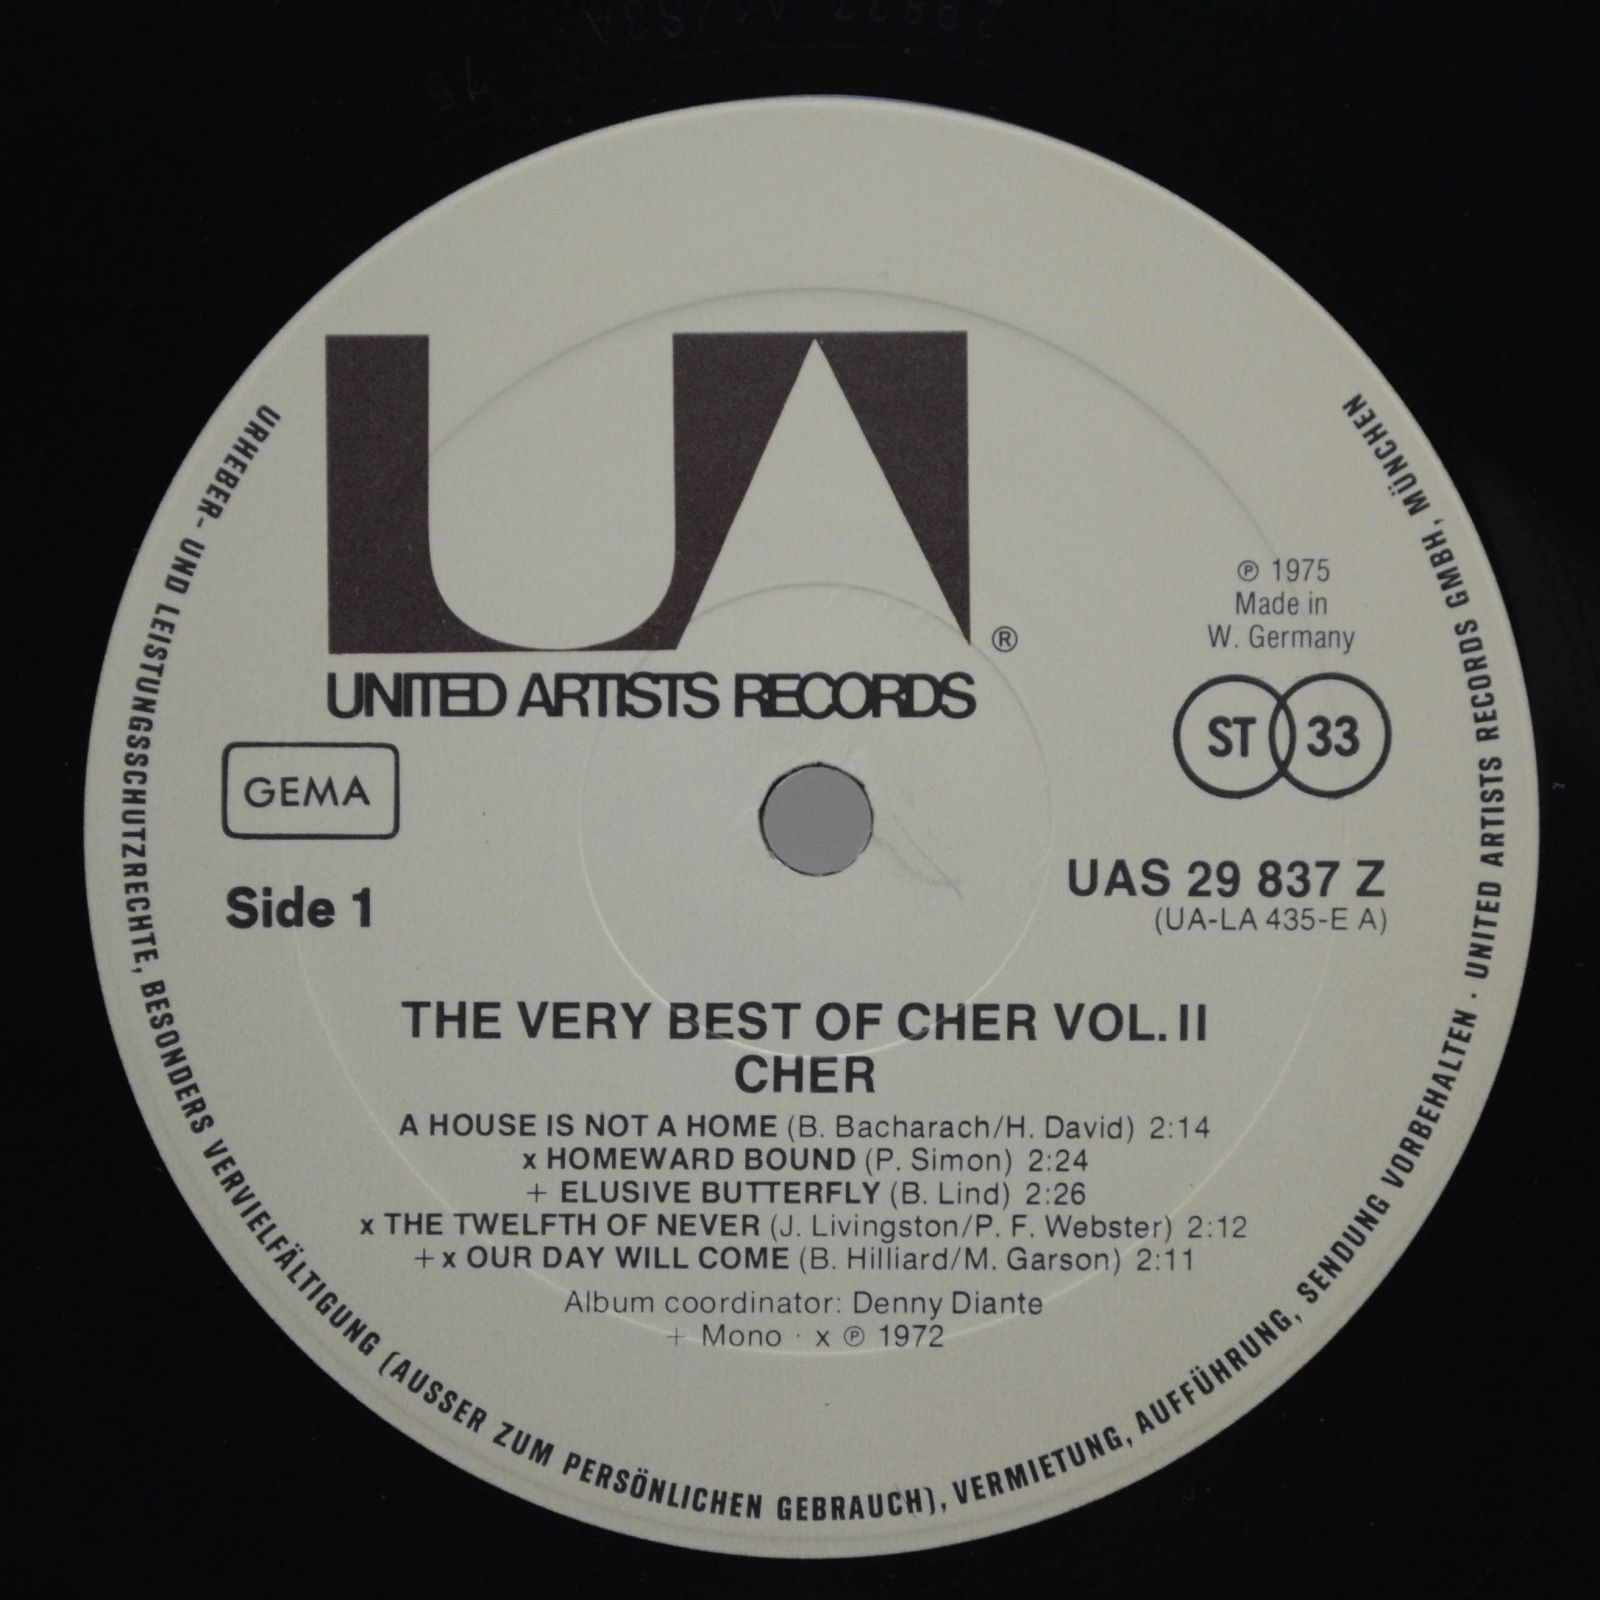 Cher — The Very Best Of Cher Vol. 2, 1975